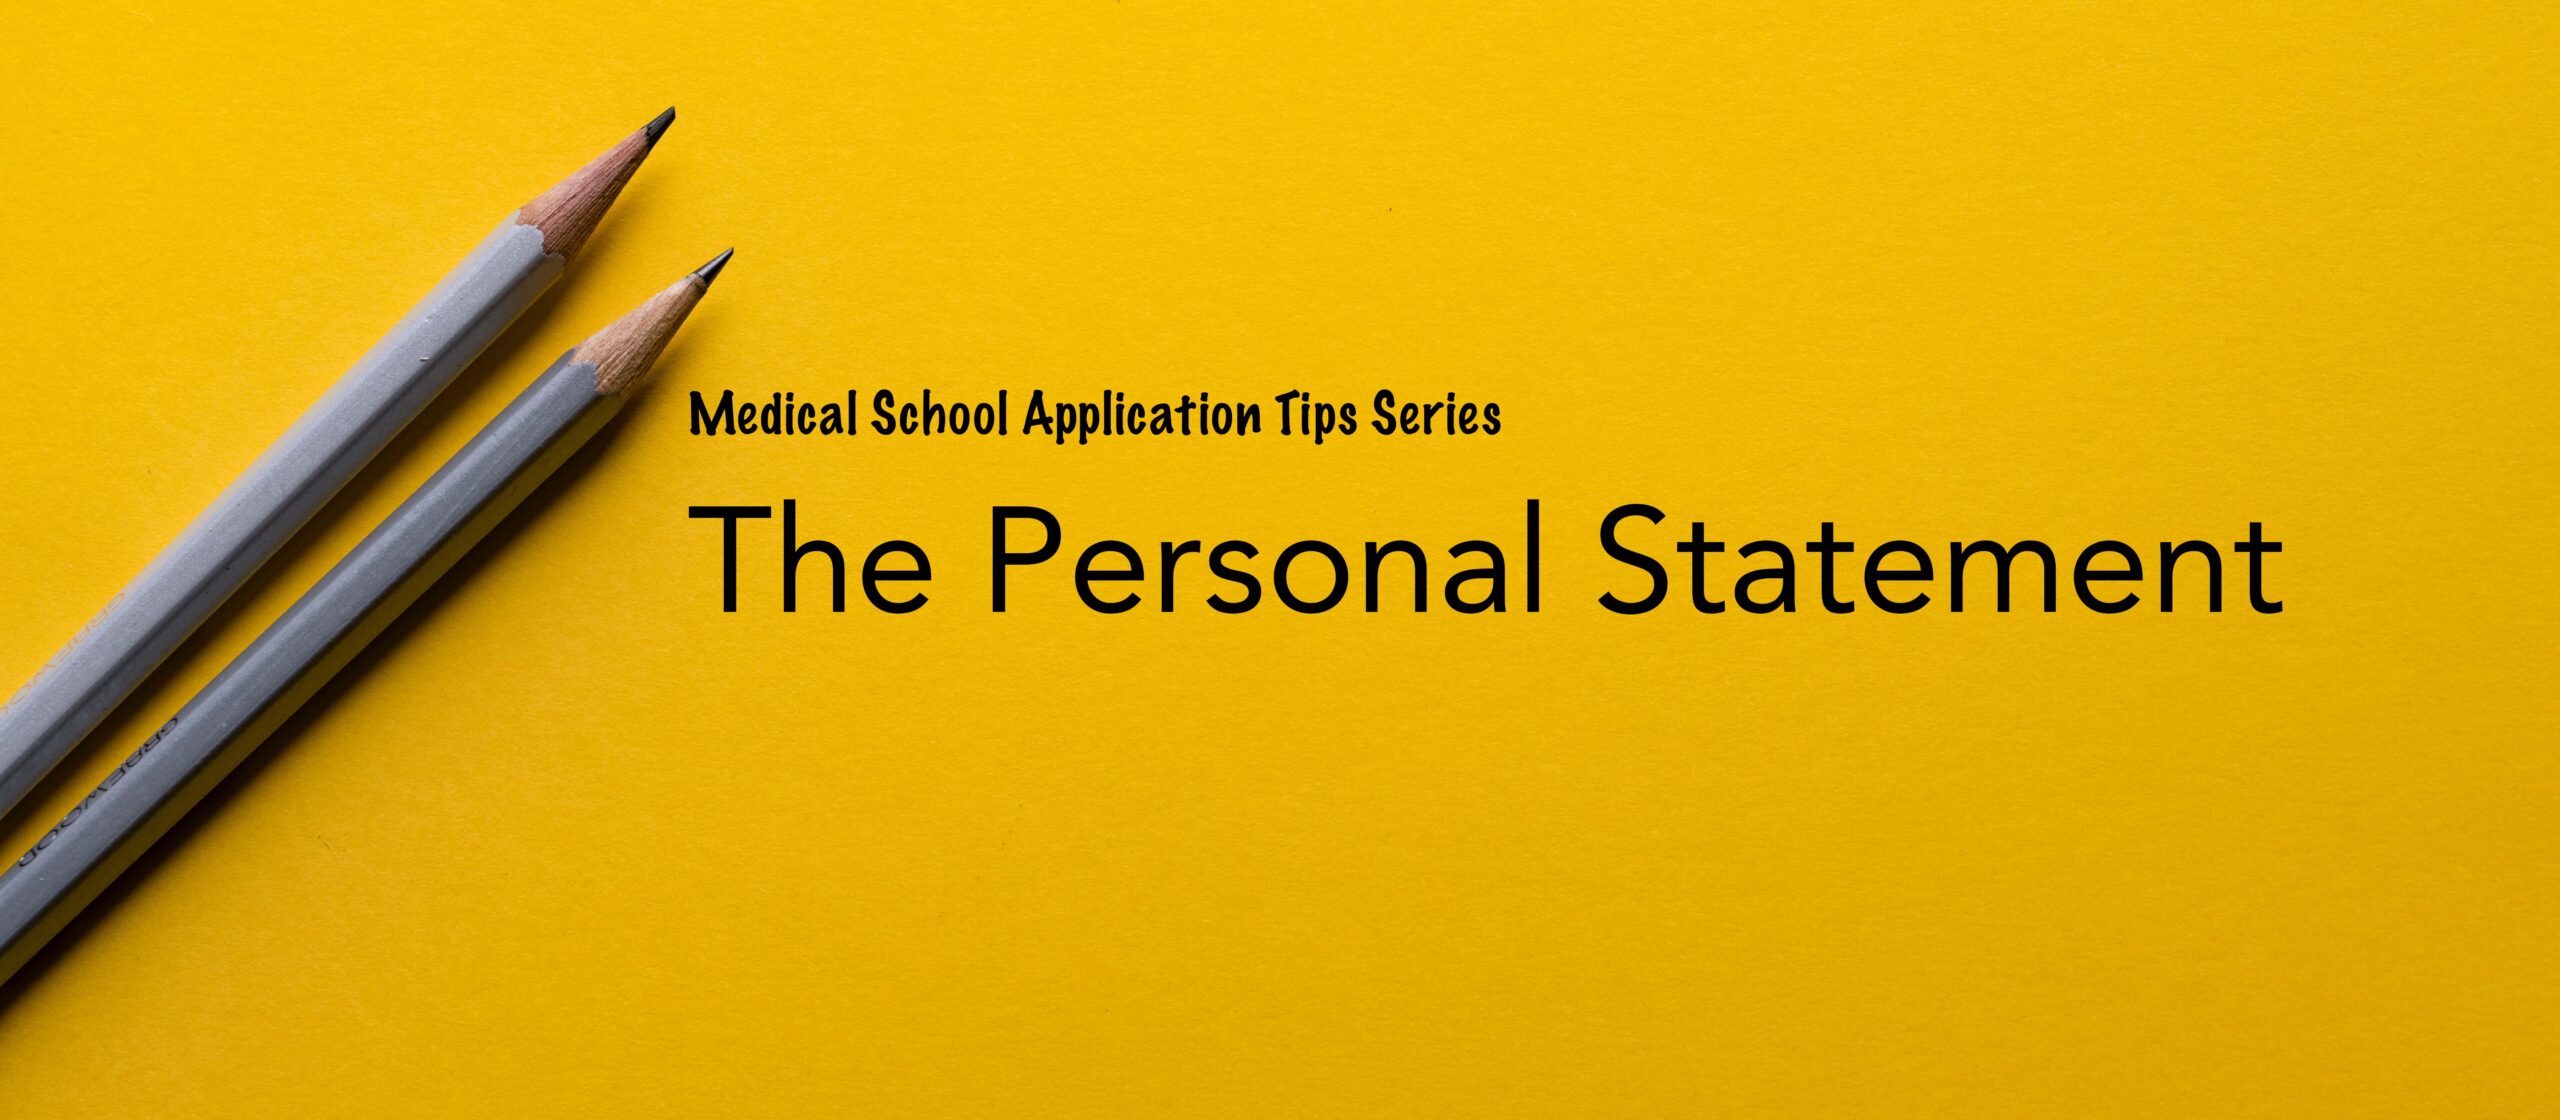 Medical School Application Series: The Personal Statement